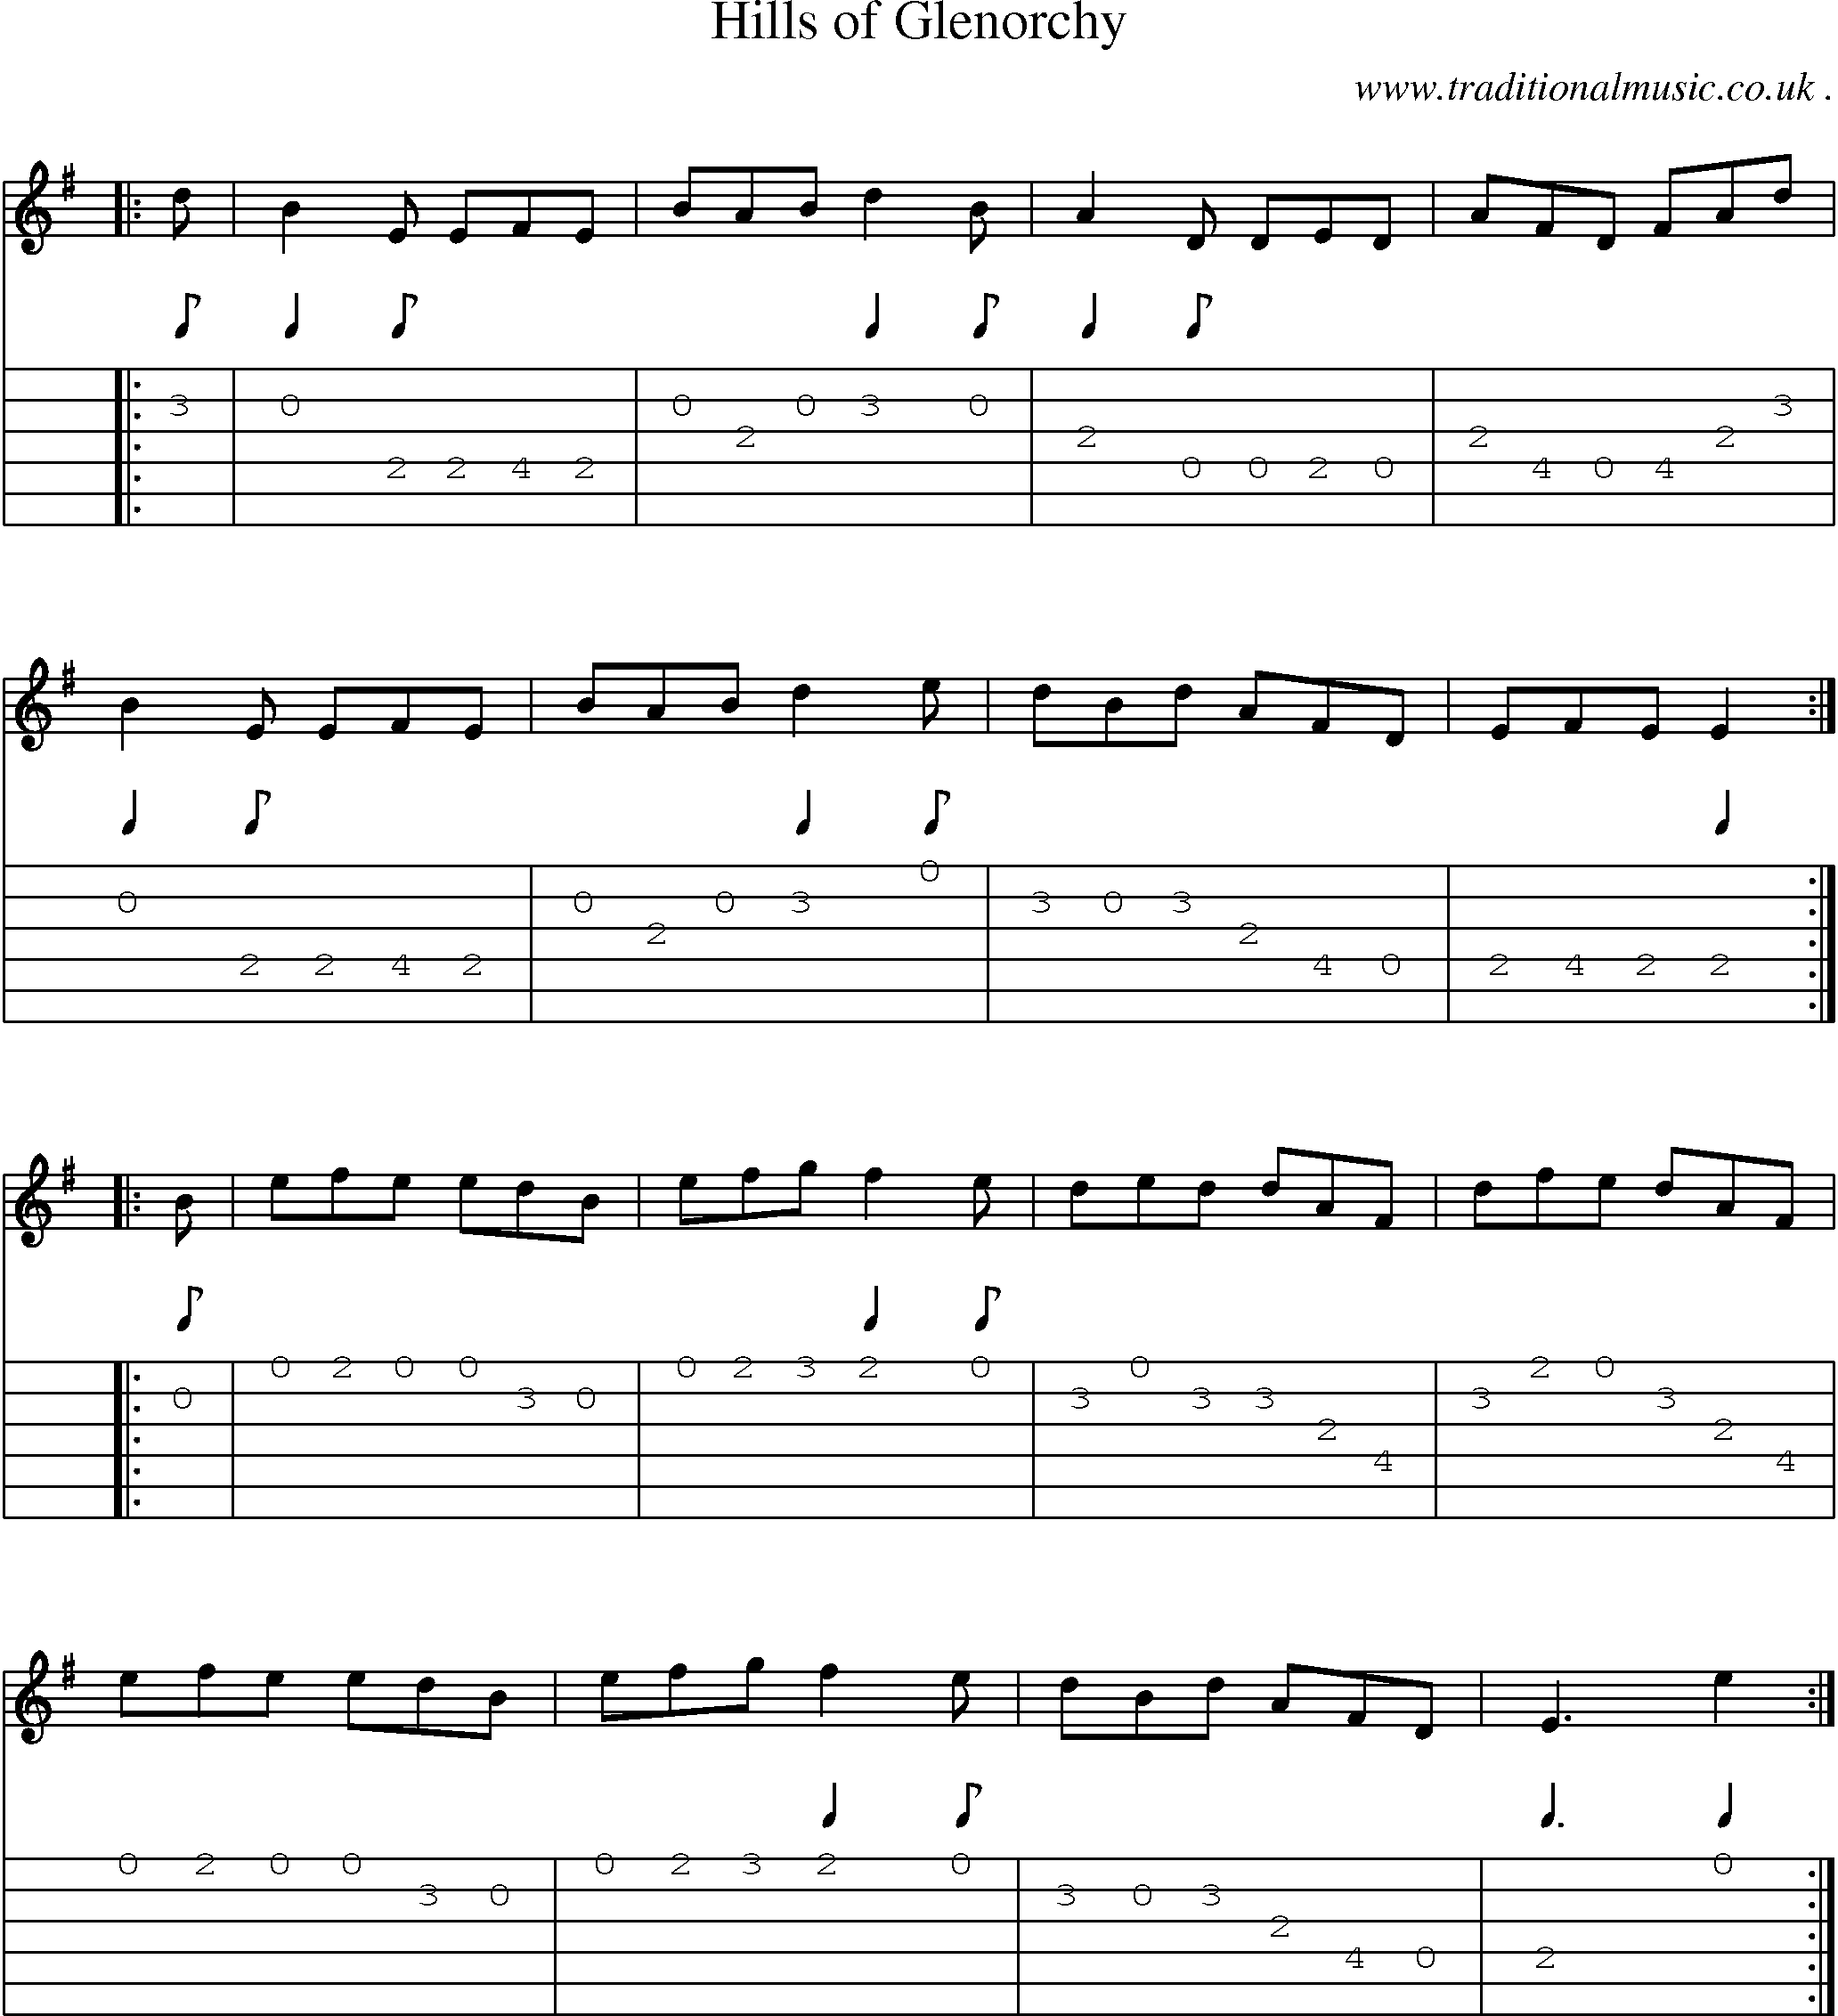 Sheet-Music and Guitar Tabs for Hills Of Glenorchy